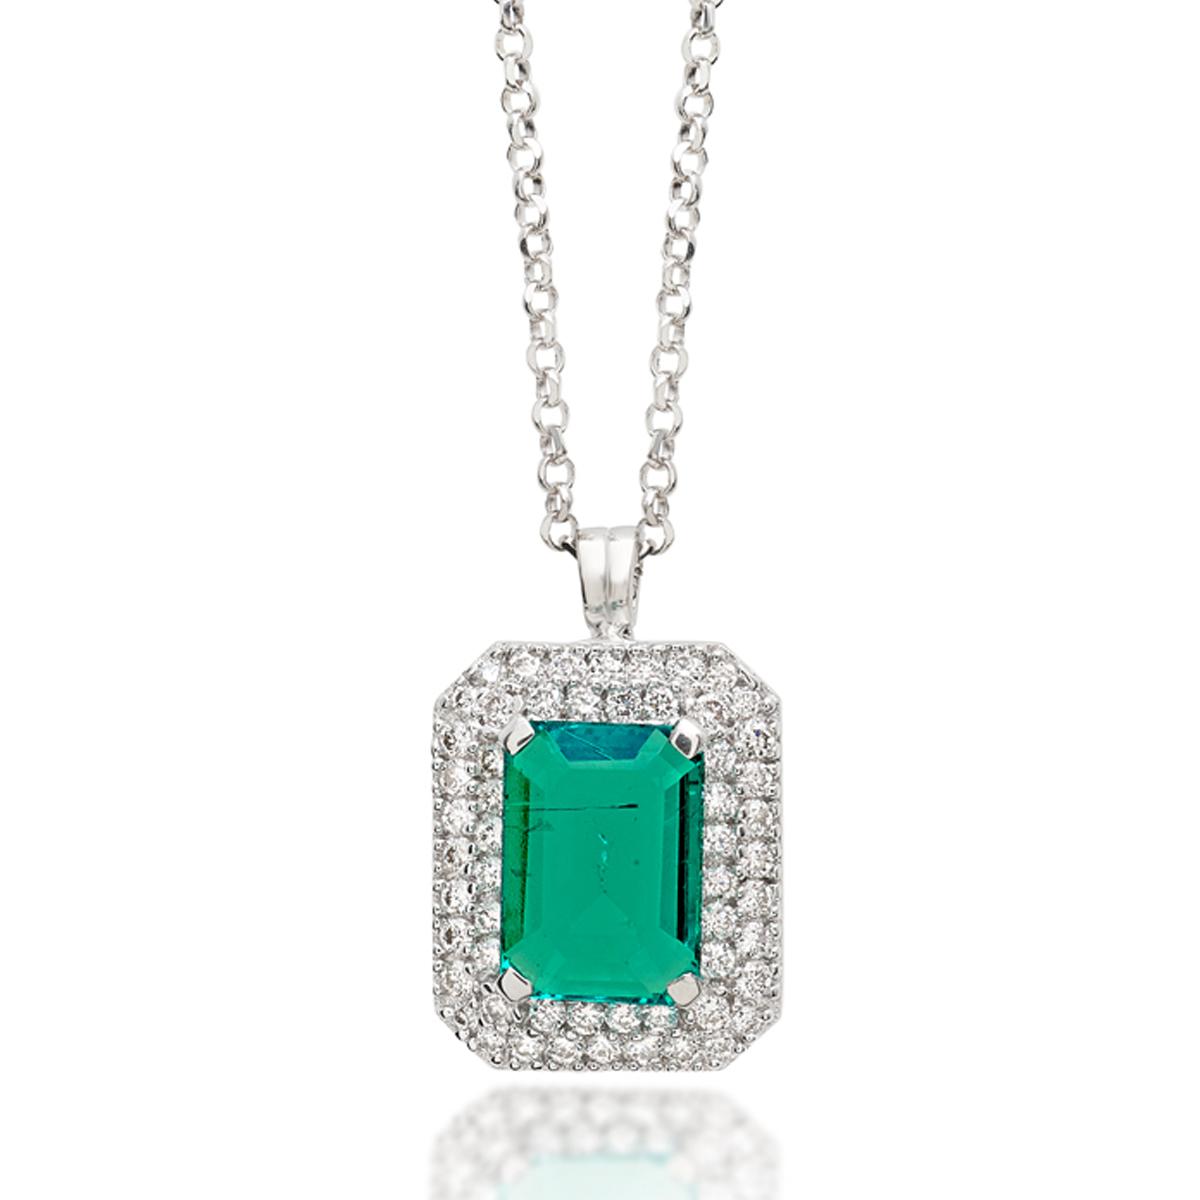 18kt white gold necklace with diamonds and emerald - CD455/SM-LB